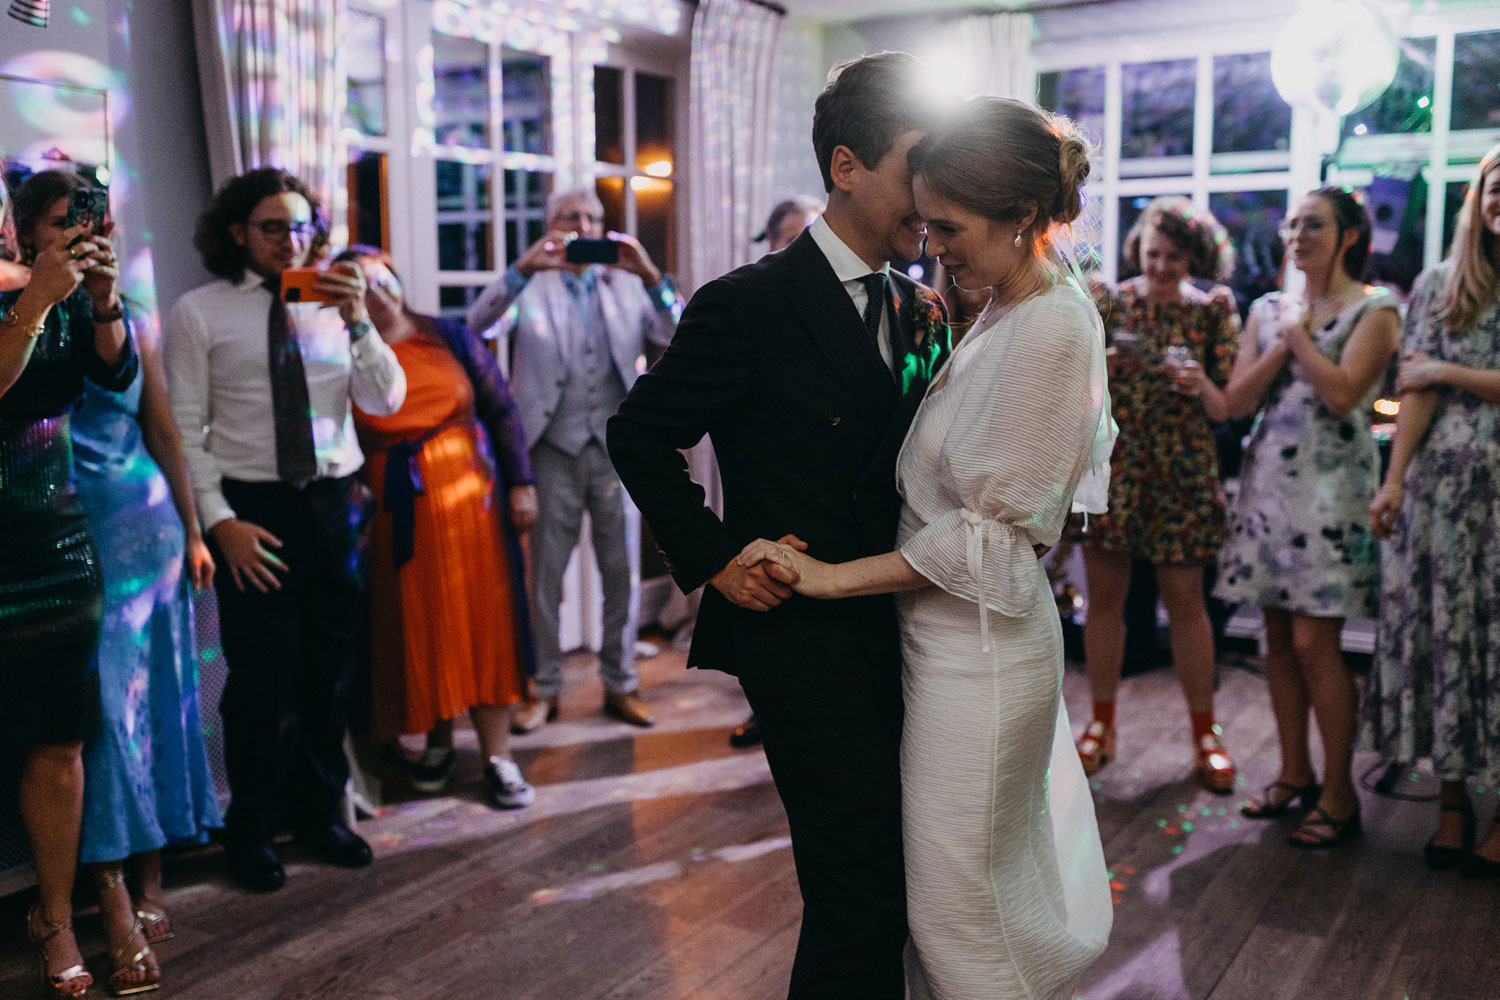 Intimate first dance moments as the couple celebrates their love at Helenekilde Badehotel